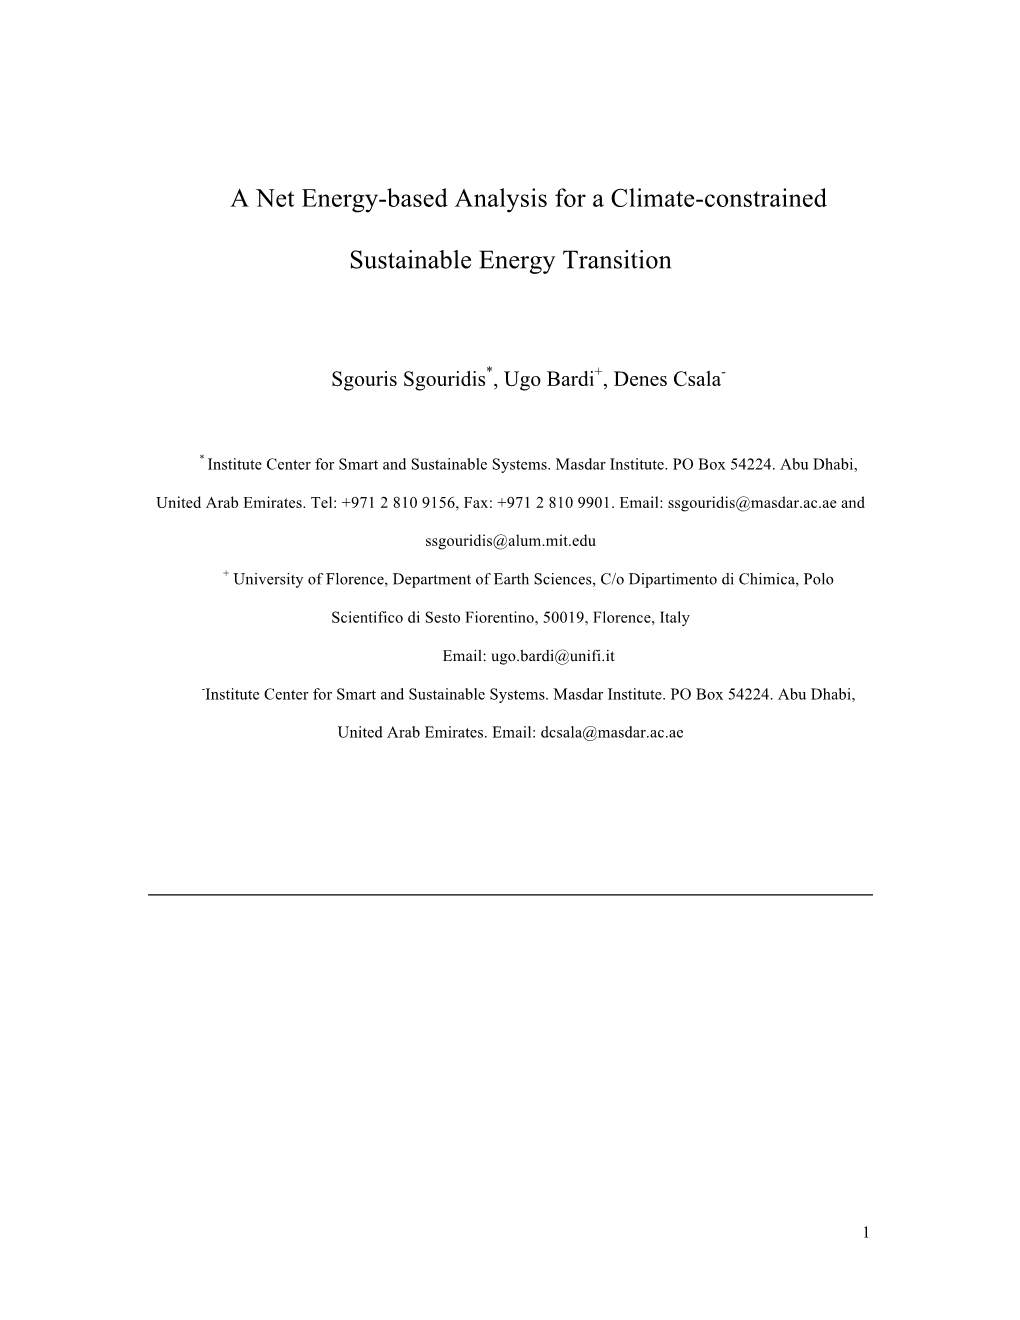 NCC Energy Transition SS UB DC 1.9.2 with Figures